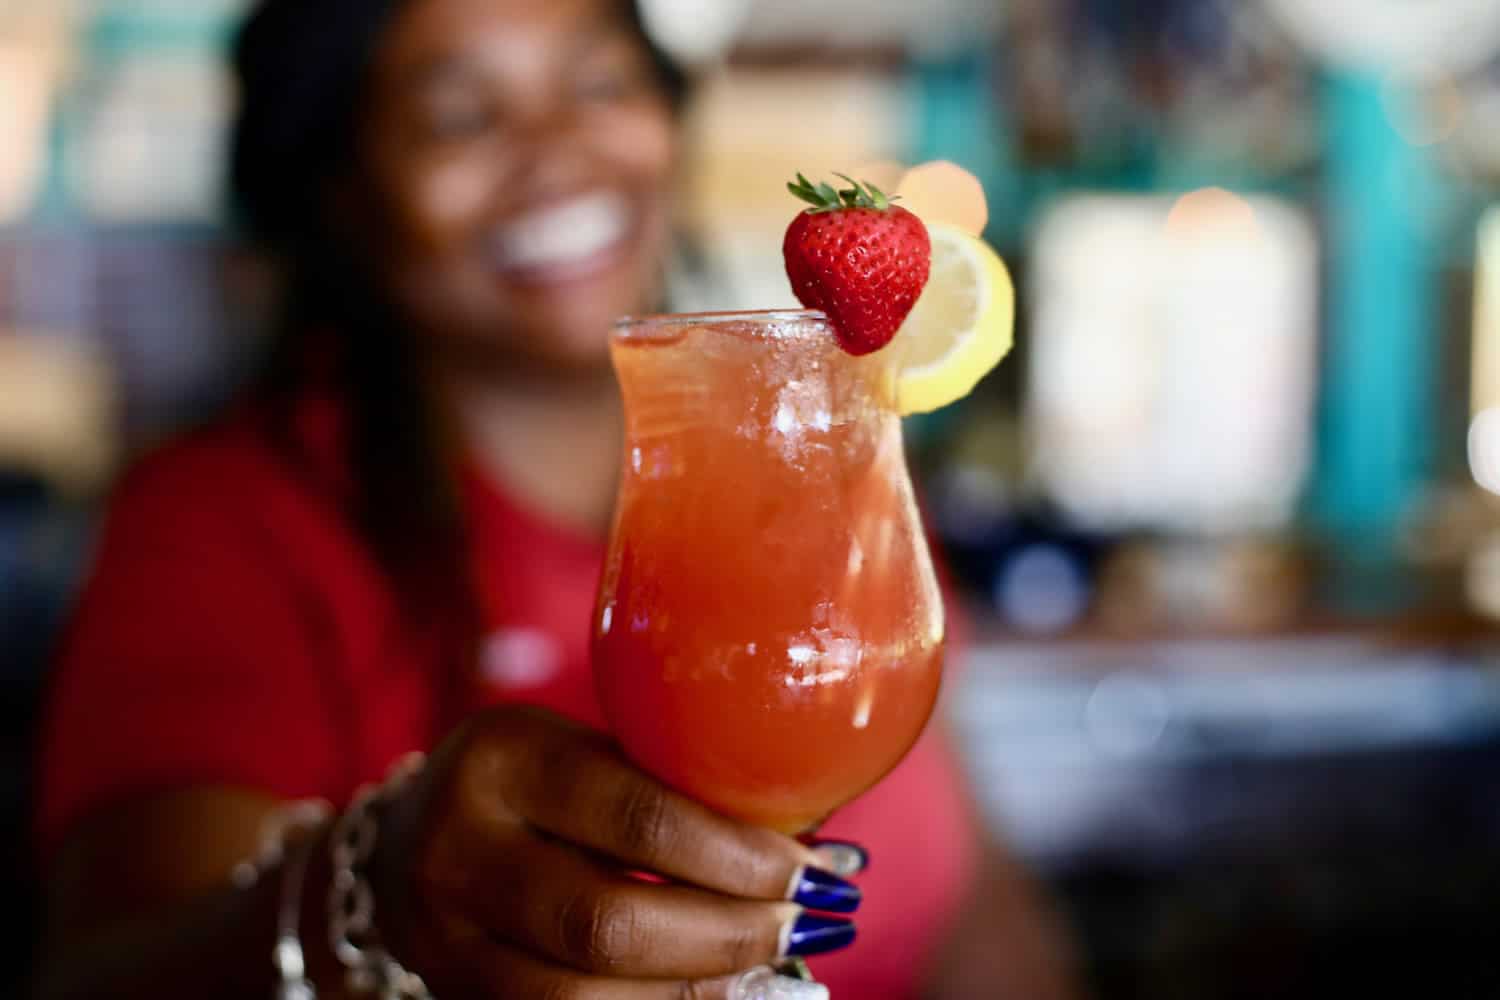 A bartender at Staniel Cay Yacht Club holds up a strawberry drink.